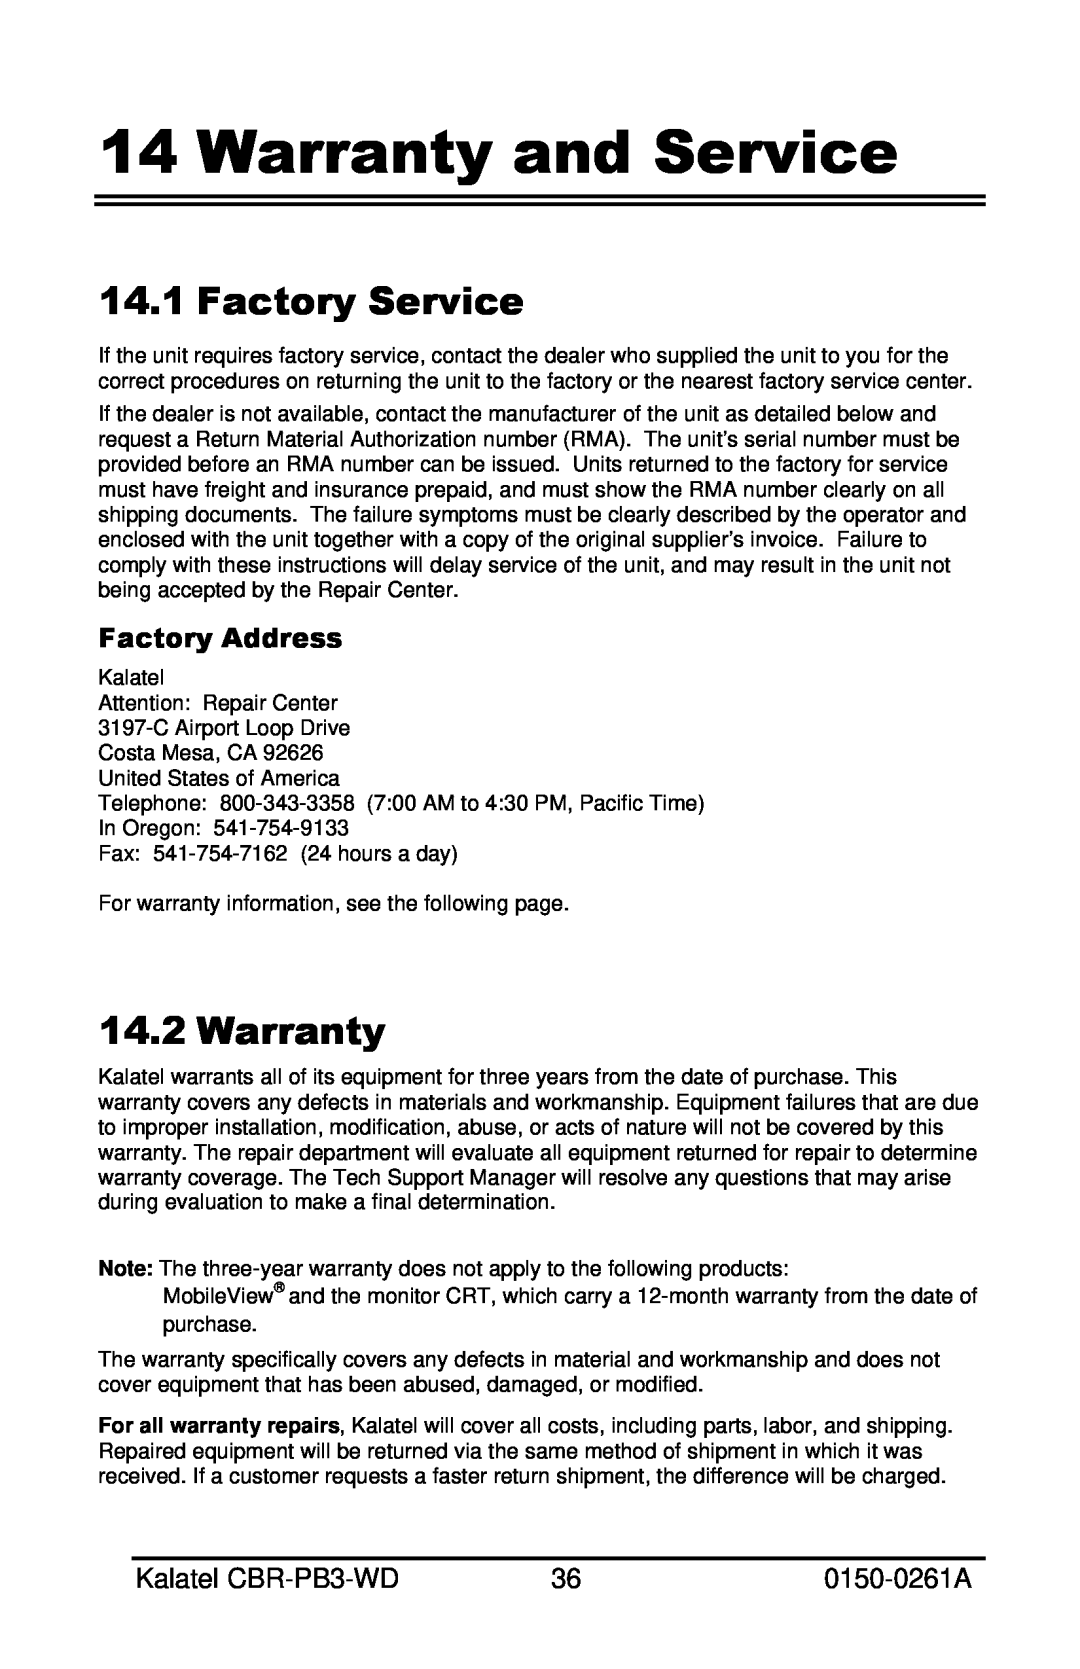 GE CBR-PB3-WD installation manual Warranty and Service, Factory Service 